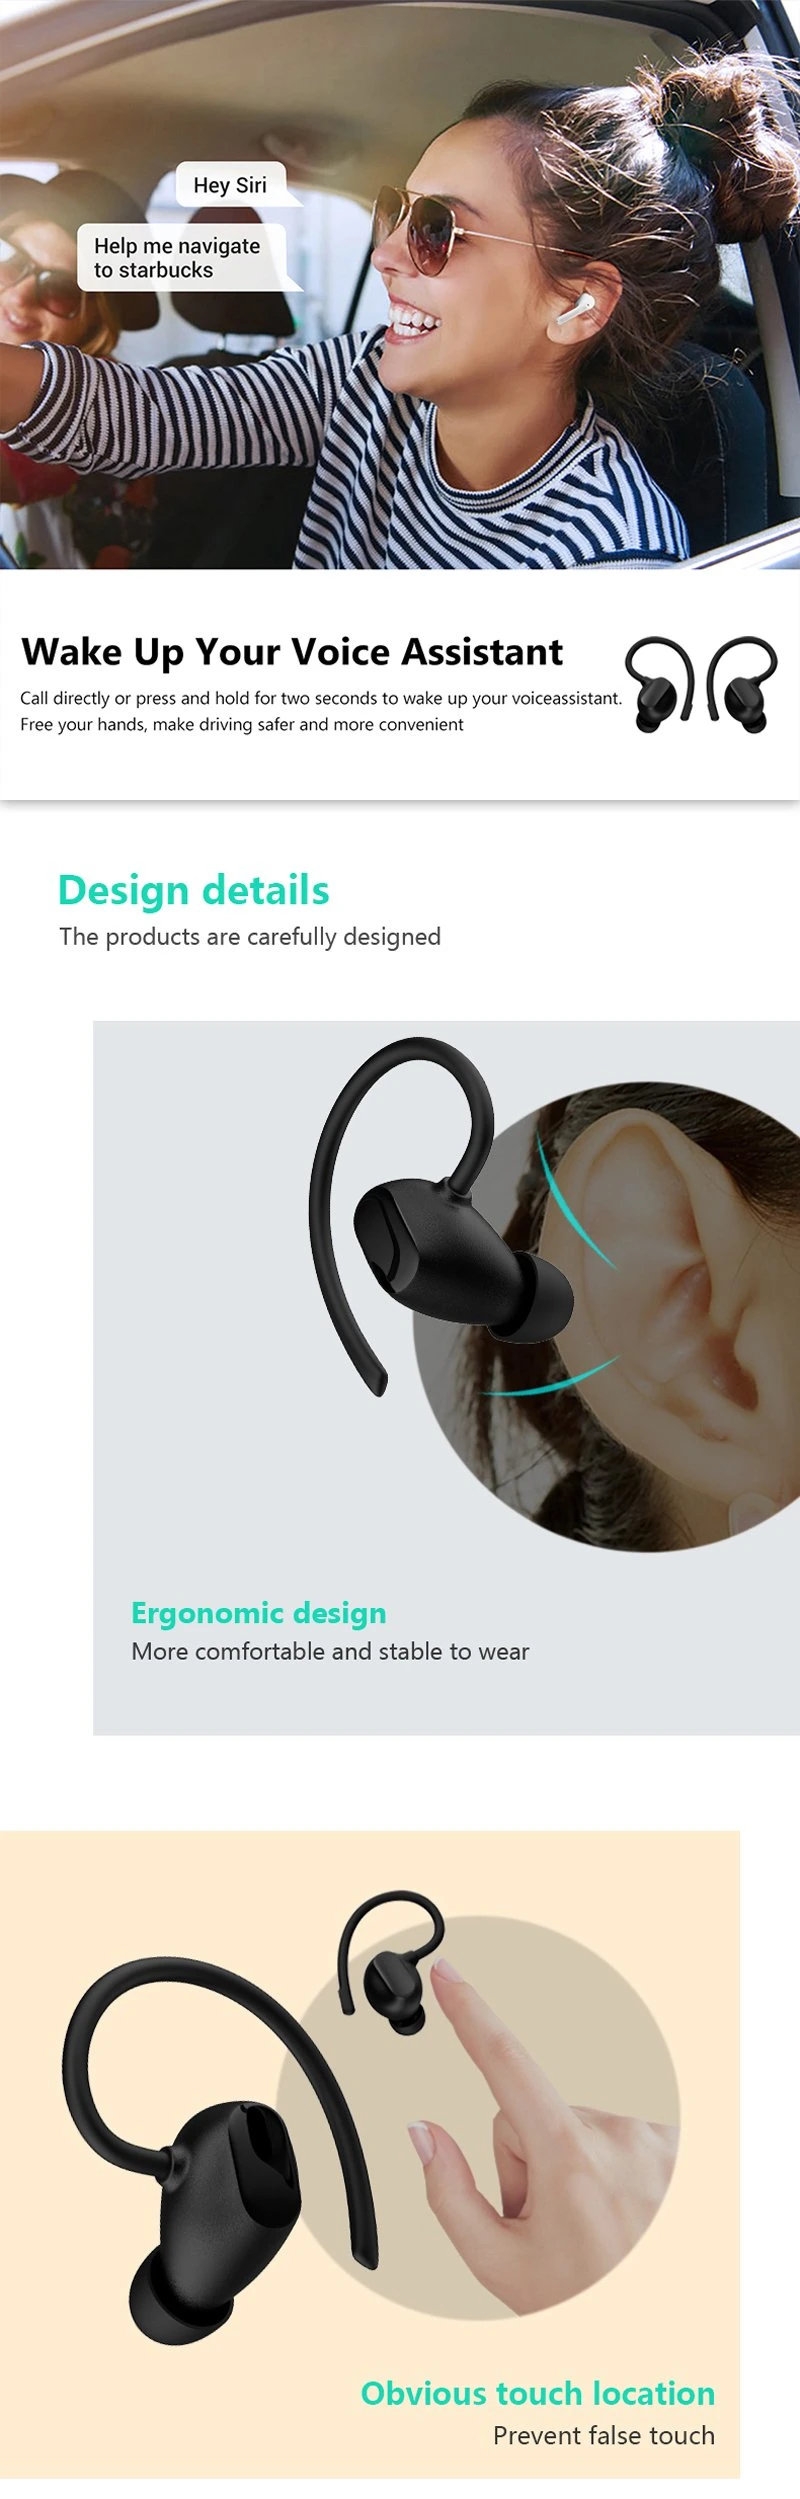 New Arrival Wireless Earbud Tws Bluetooth Earbuds with Small MOQ